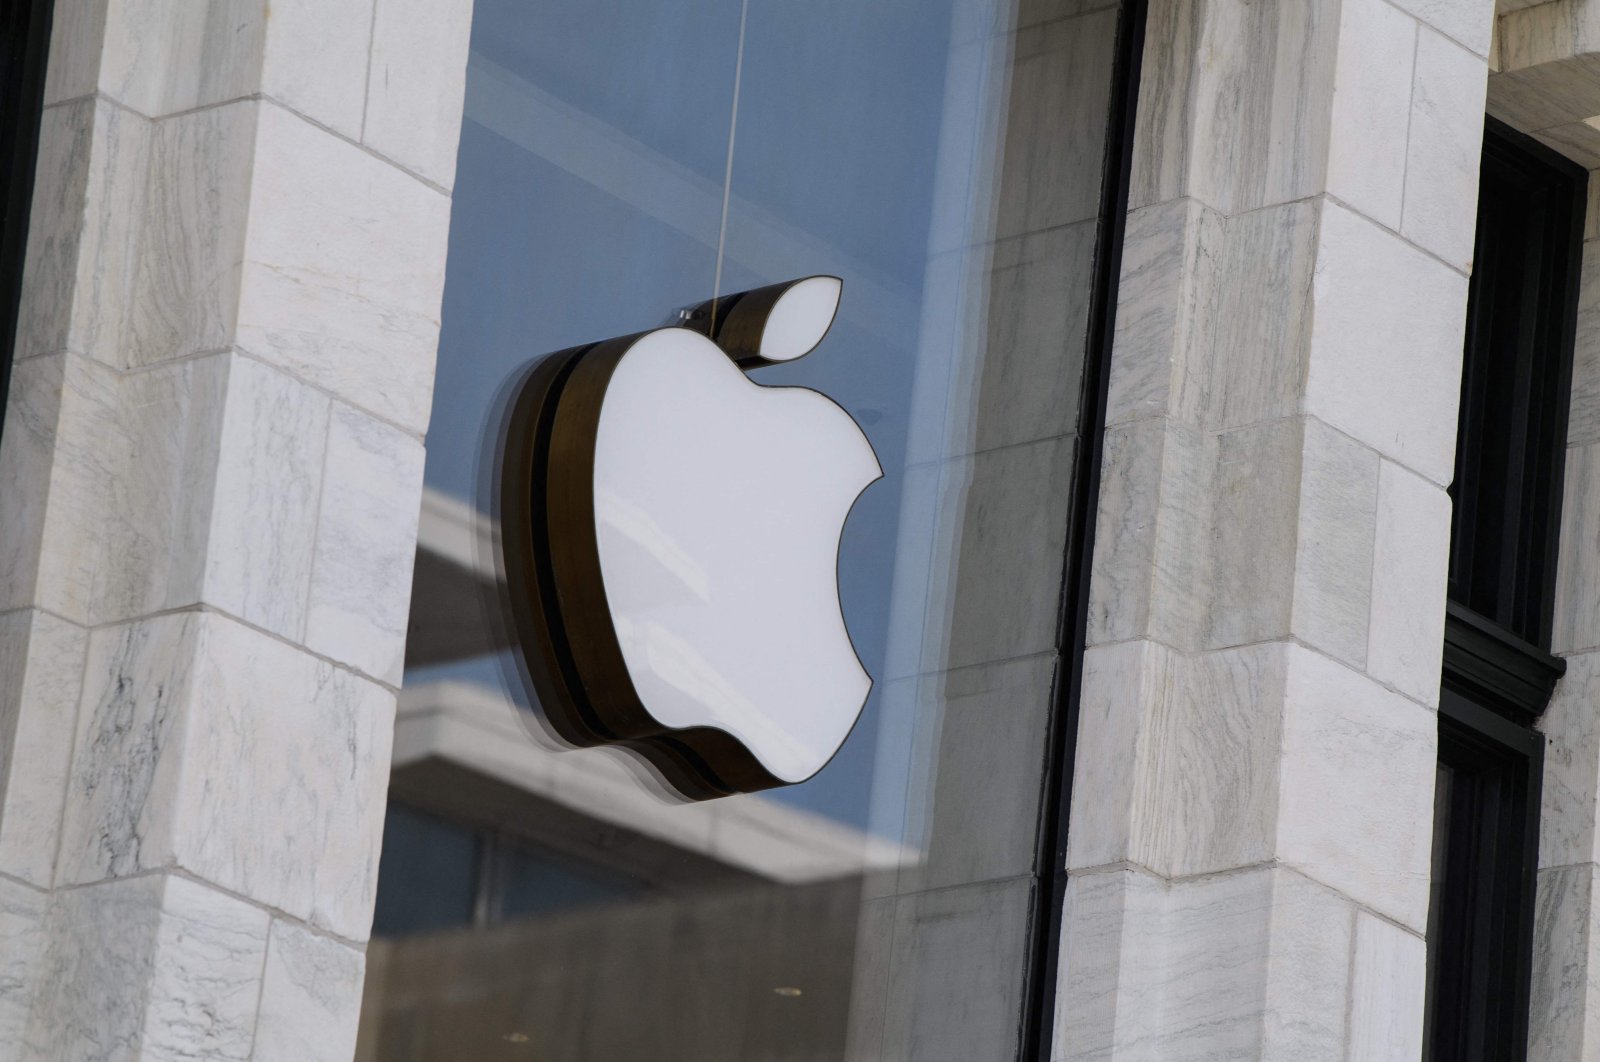 The Apple logo is seen at the entrance of an Apple store in Washington, D.C., U.S., Sept. 14, 2021. (AFP Photo)